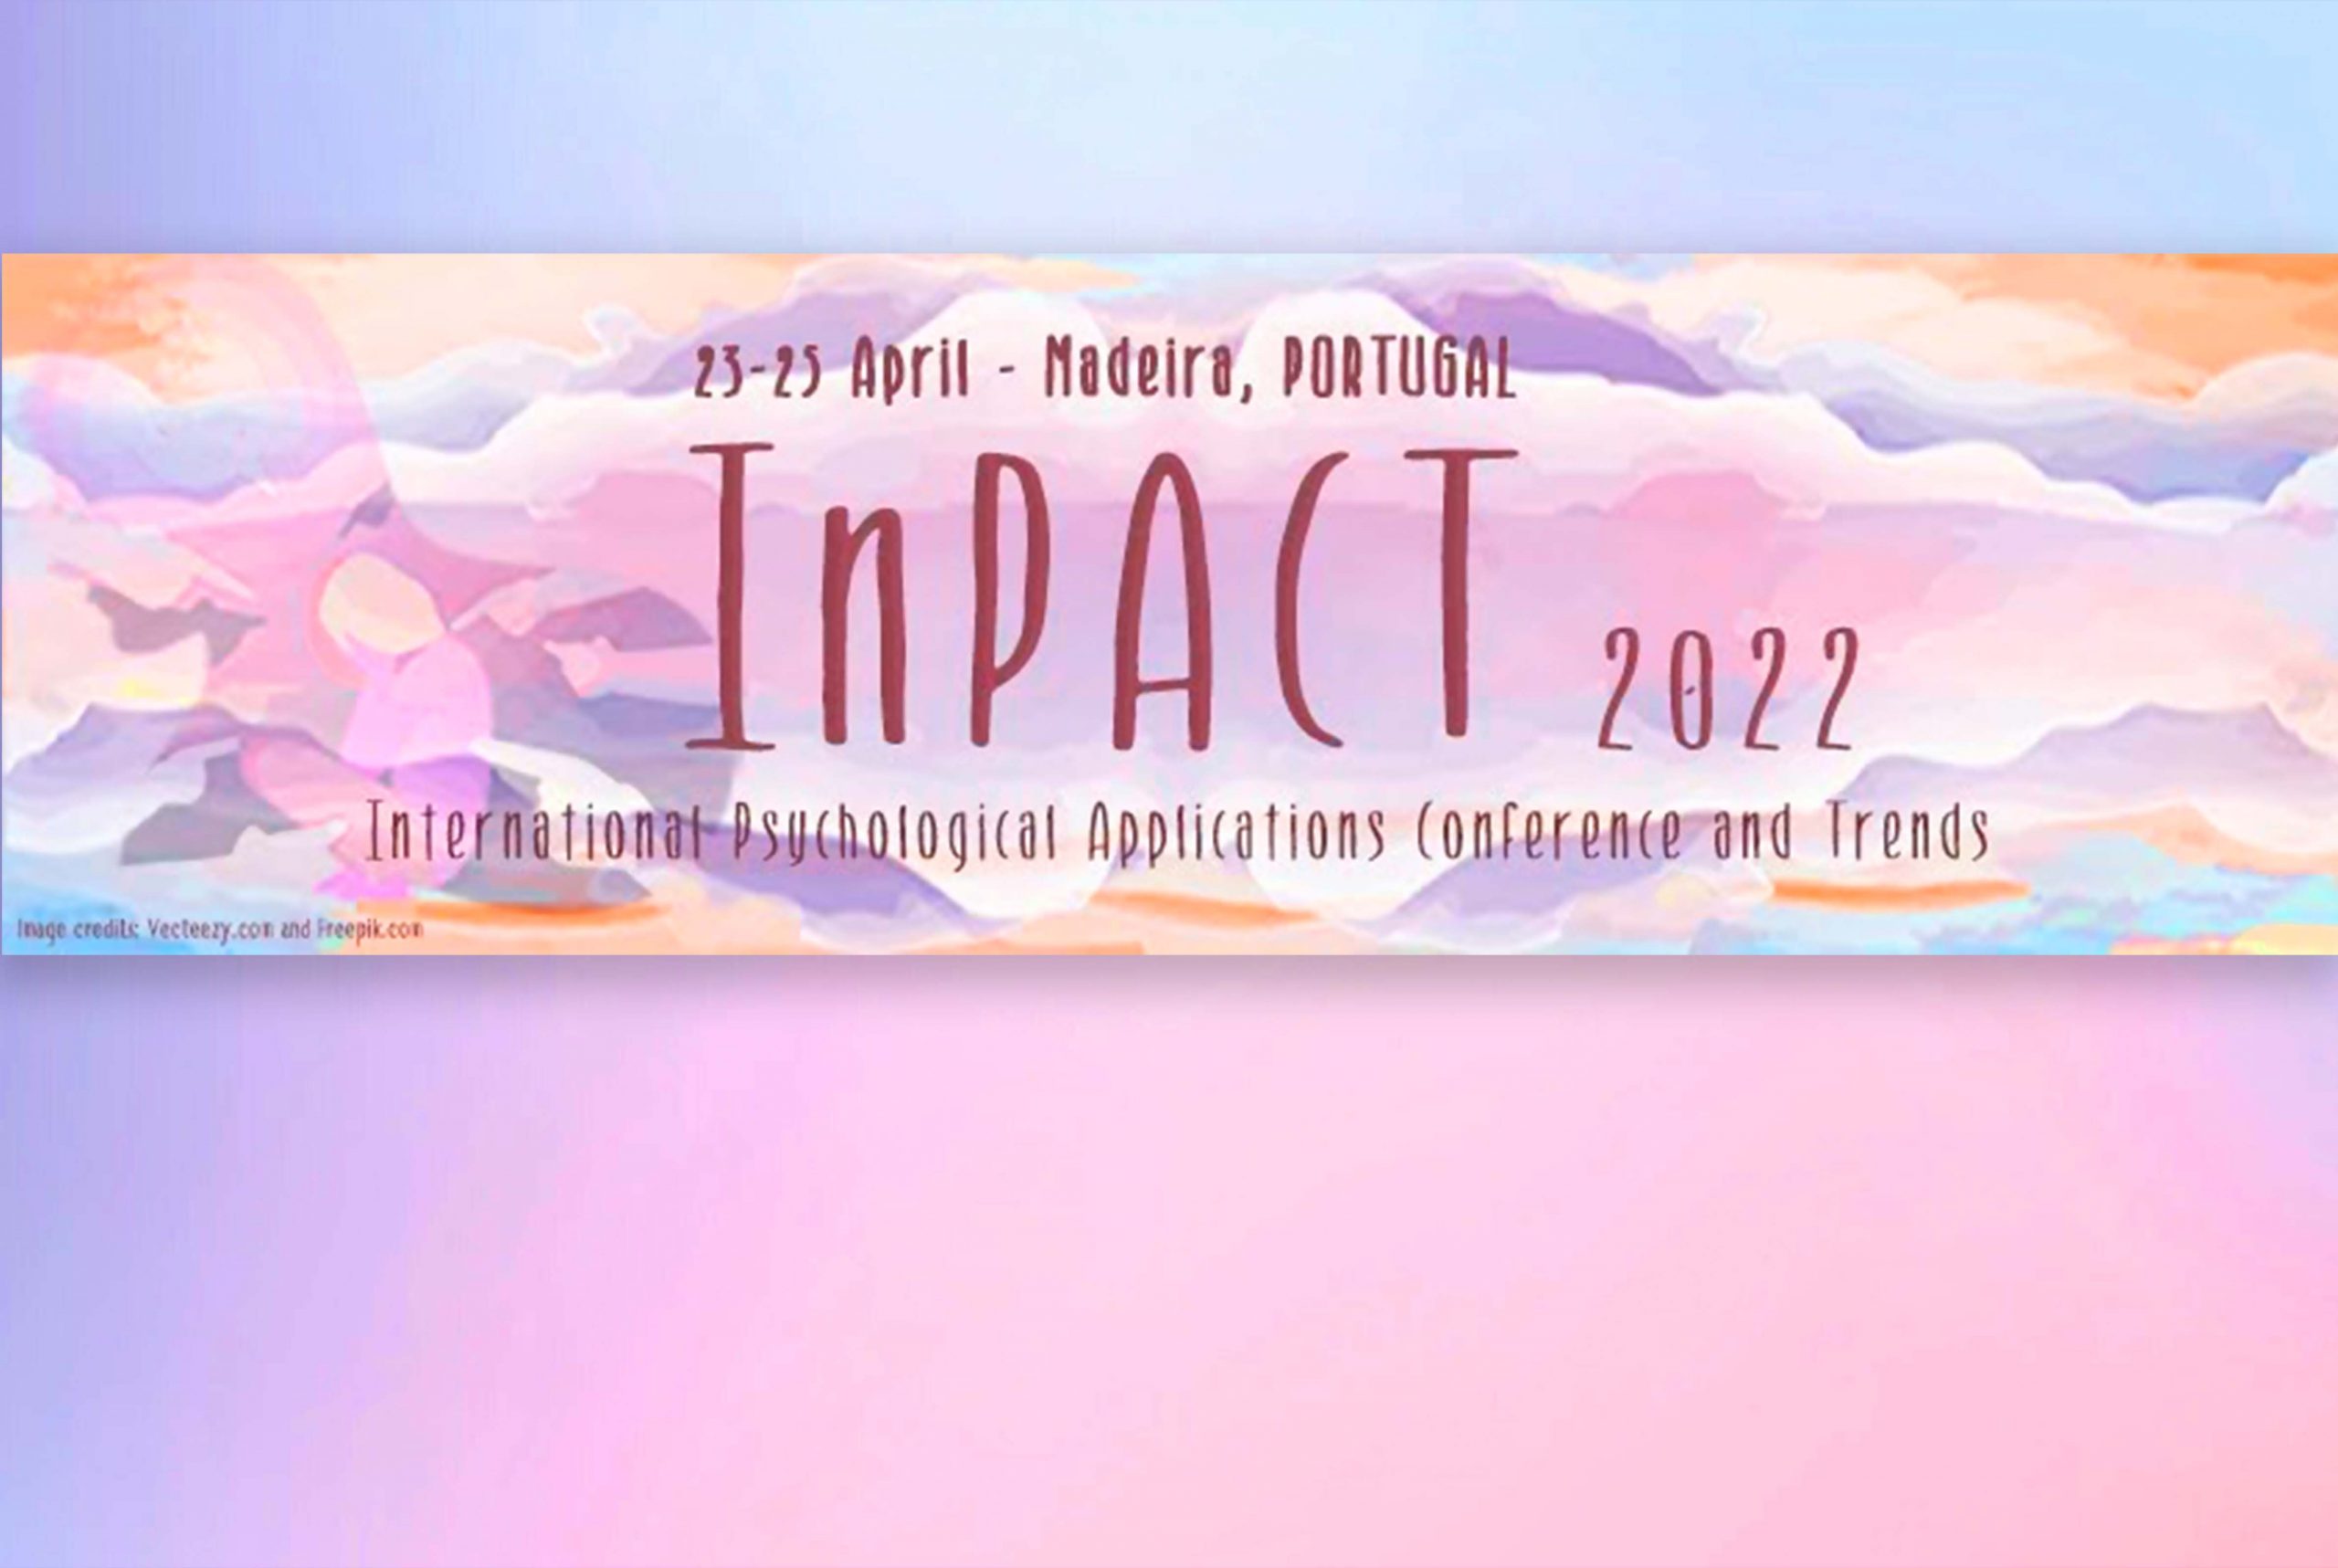 The International Psychological Applications Conference and Trends (InPACT) 2022